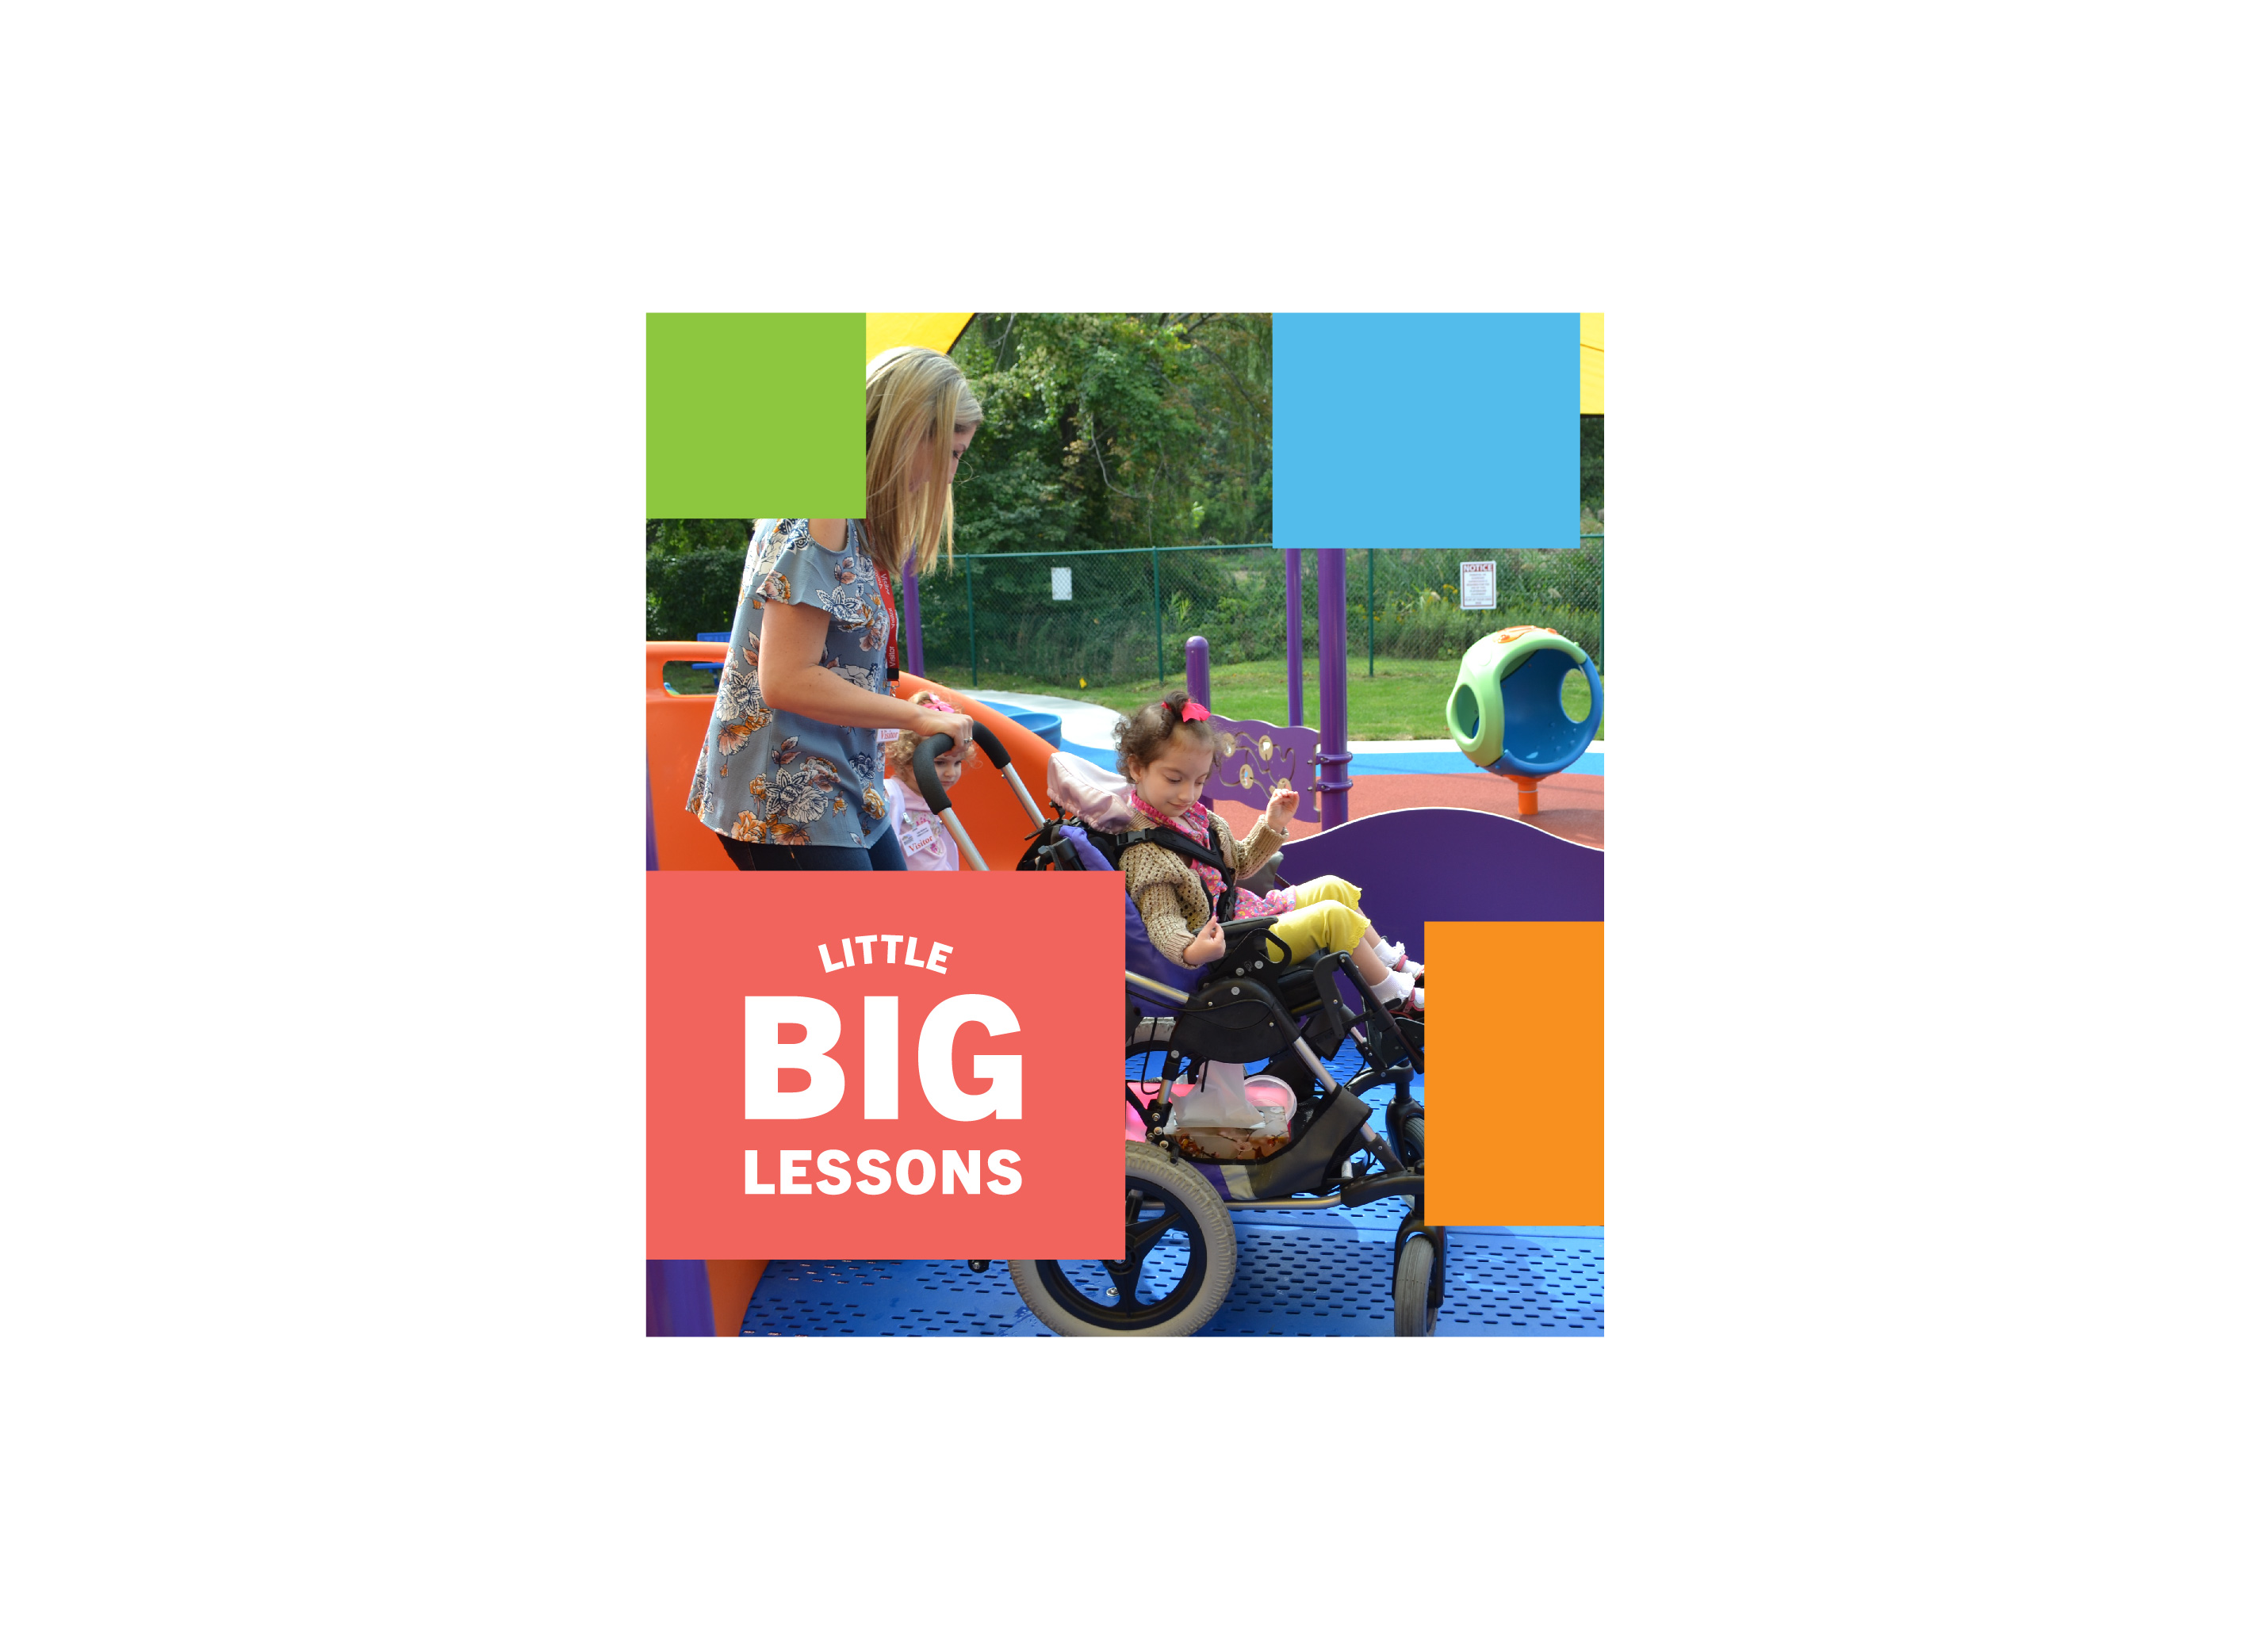 Woman pushing a child in a stroller at an accessible play area. Little Big Lessons logo text.